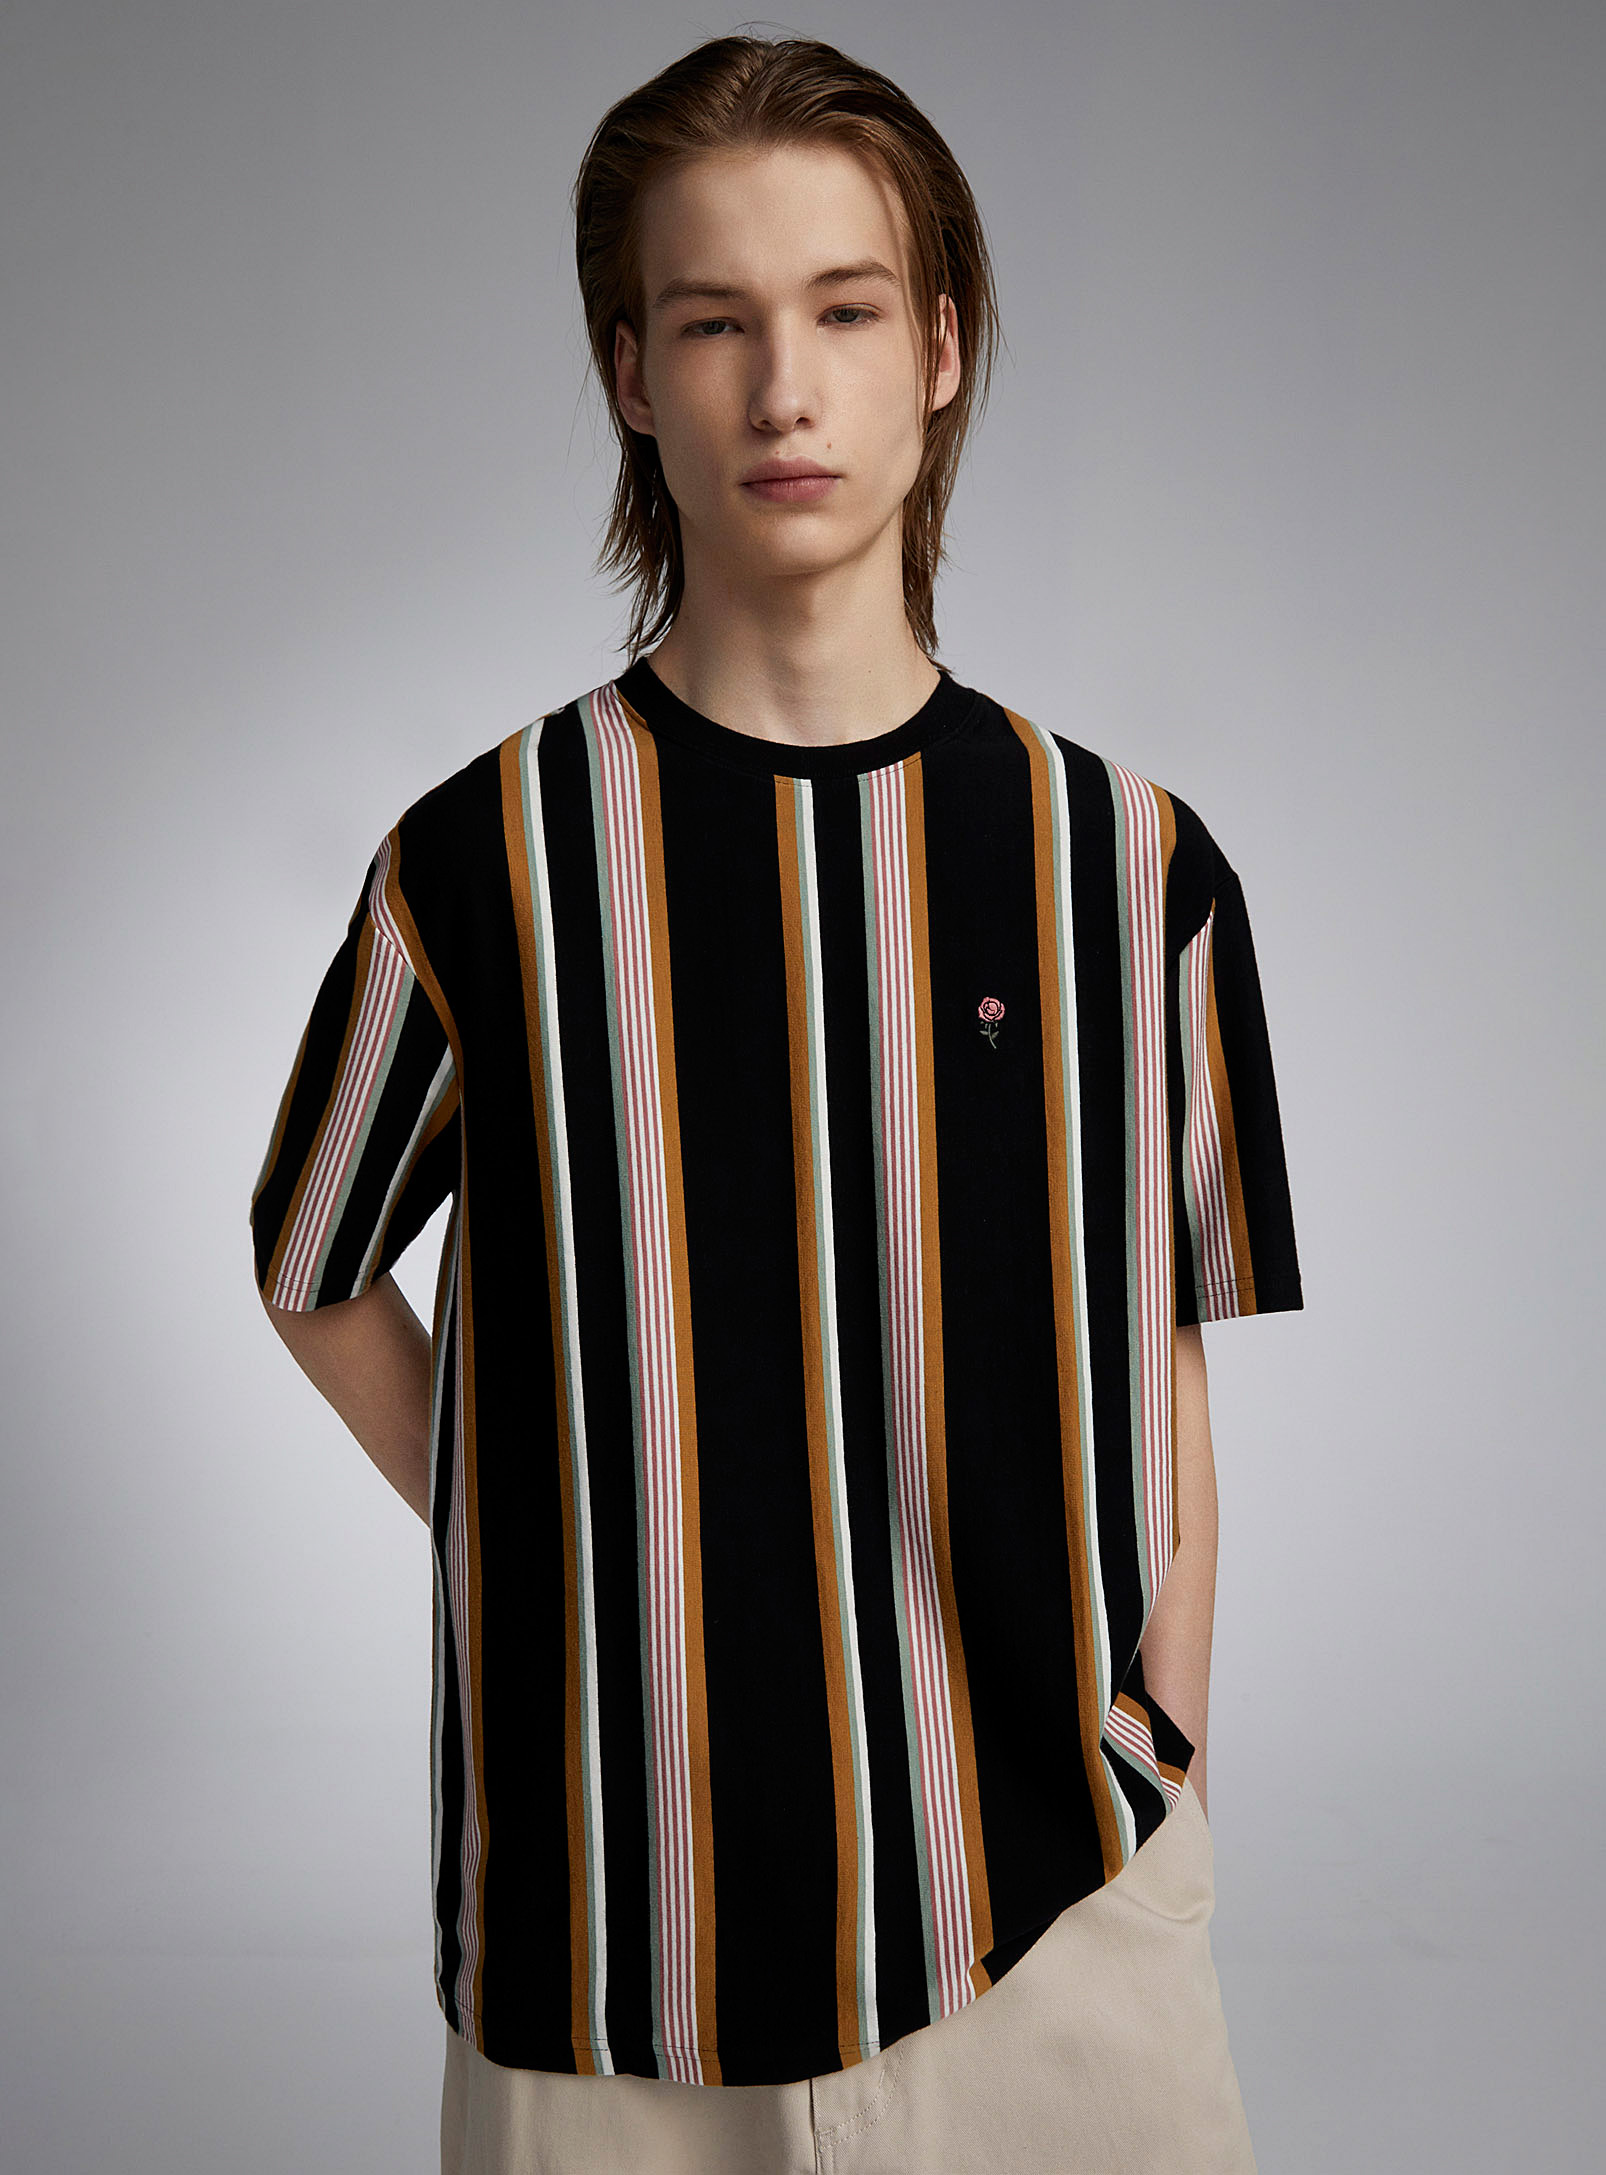 Djab Small Embroidery Striped T-shirt In Black